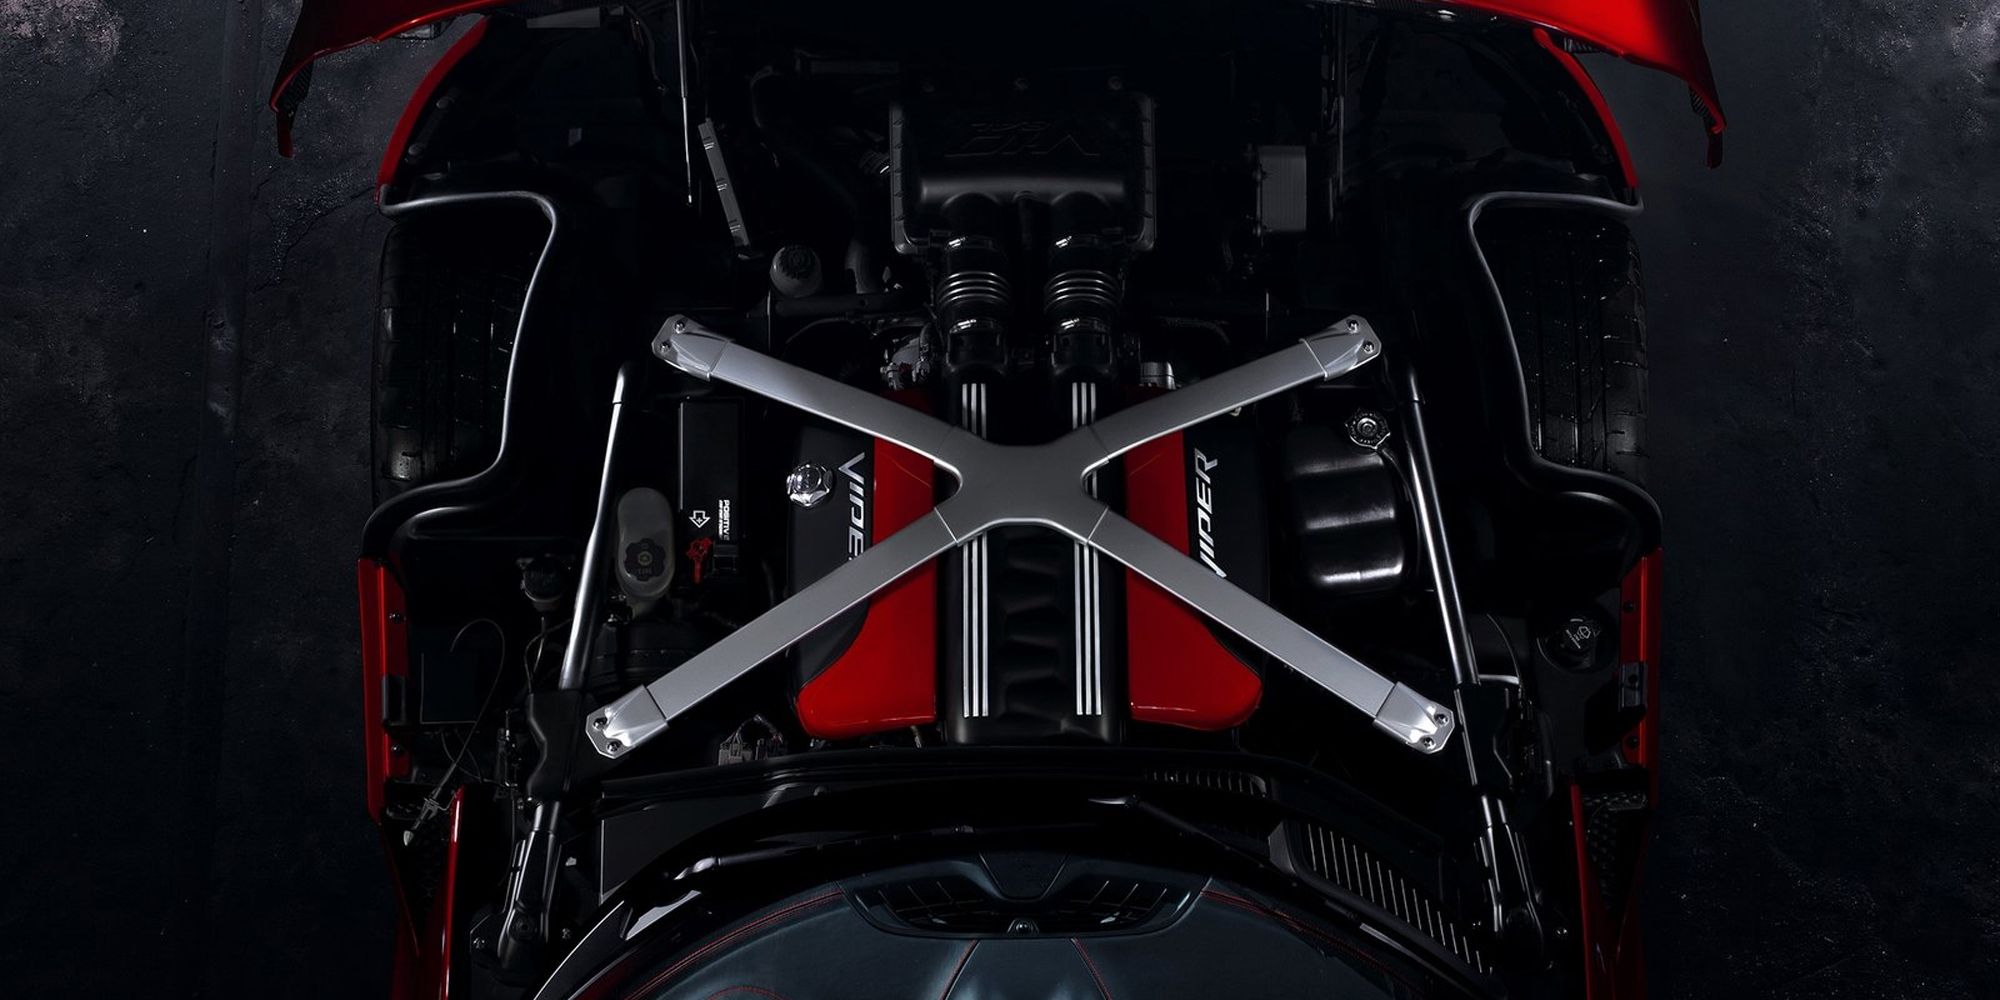 The engine in the Dodge Viper